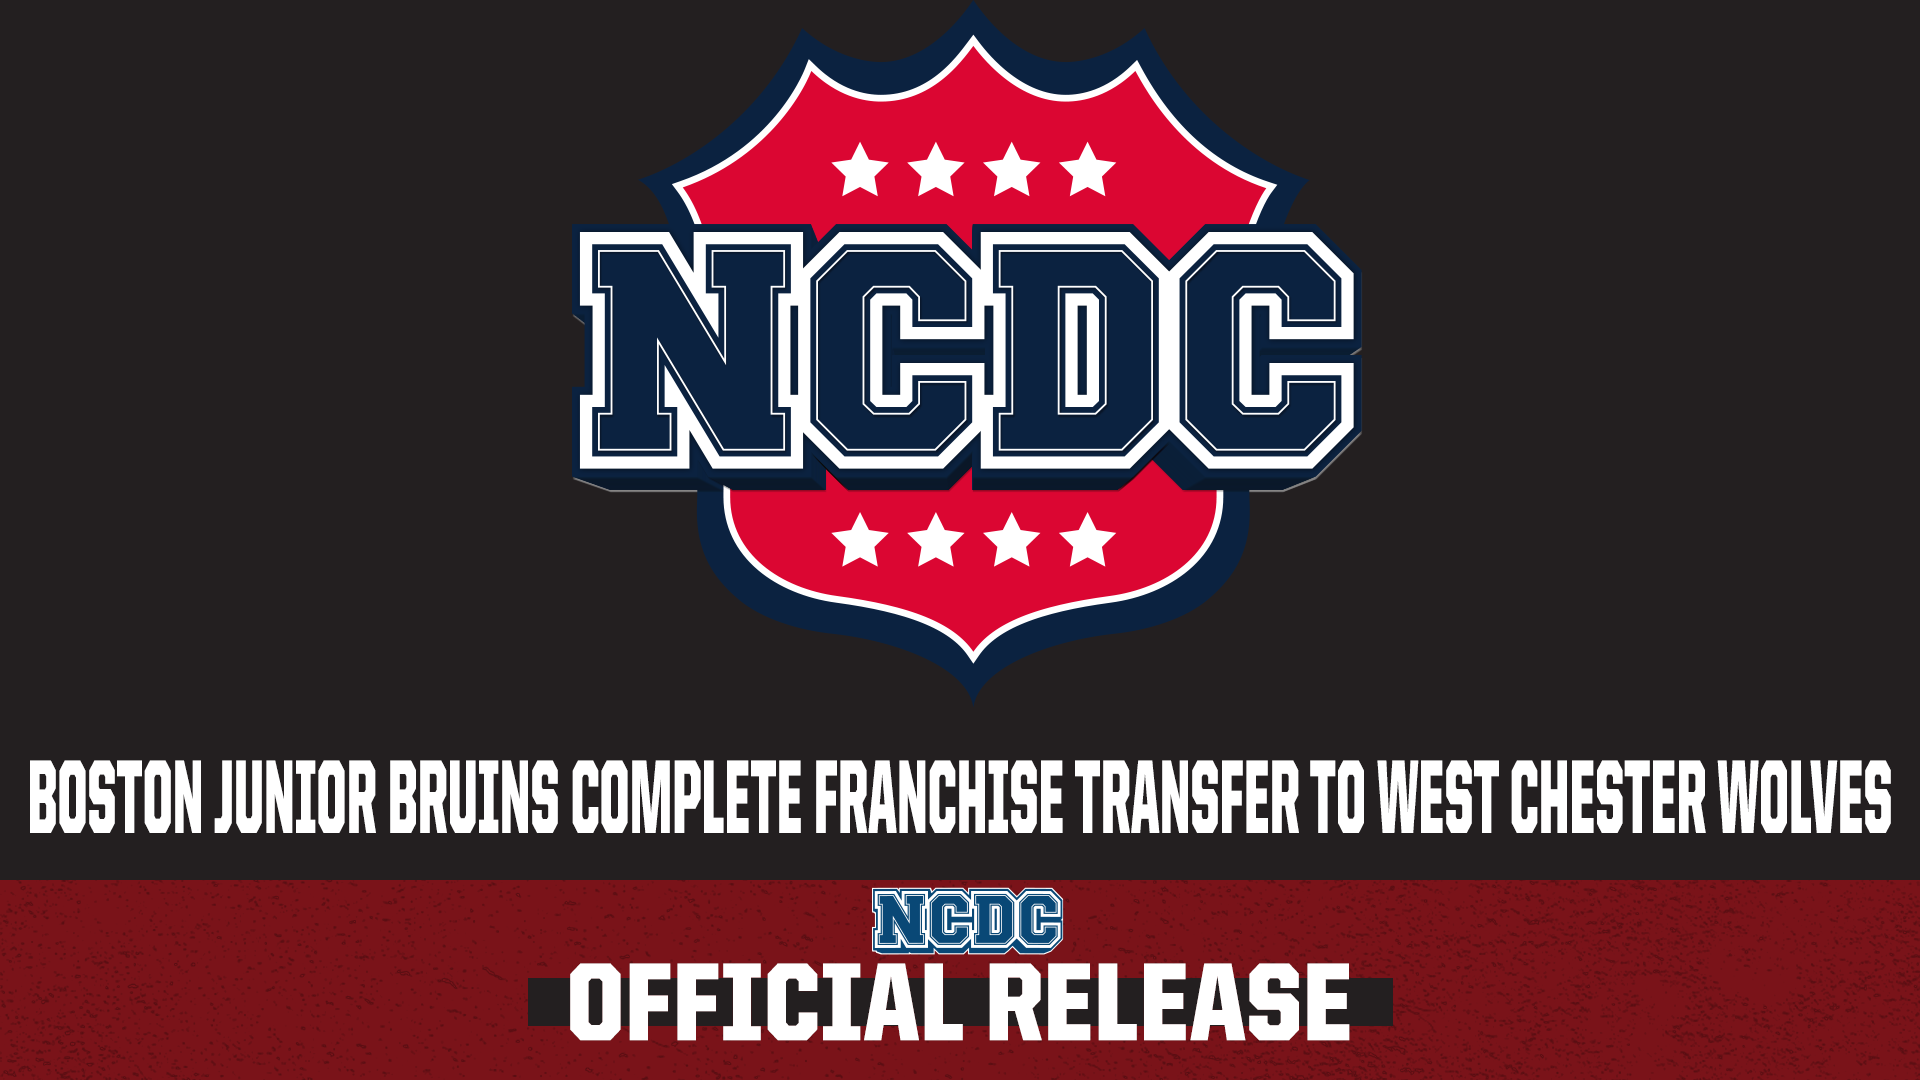 Boston Junior Bruins Transfer NCDC Franchise To West Chester Wolves